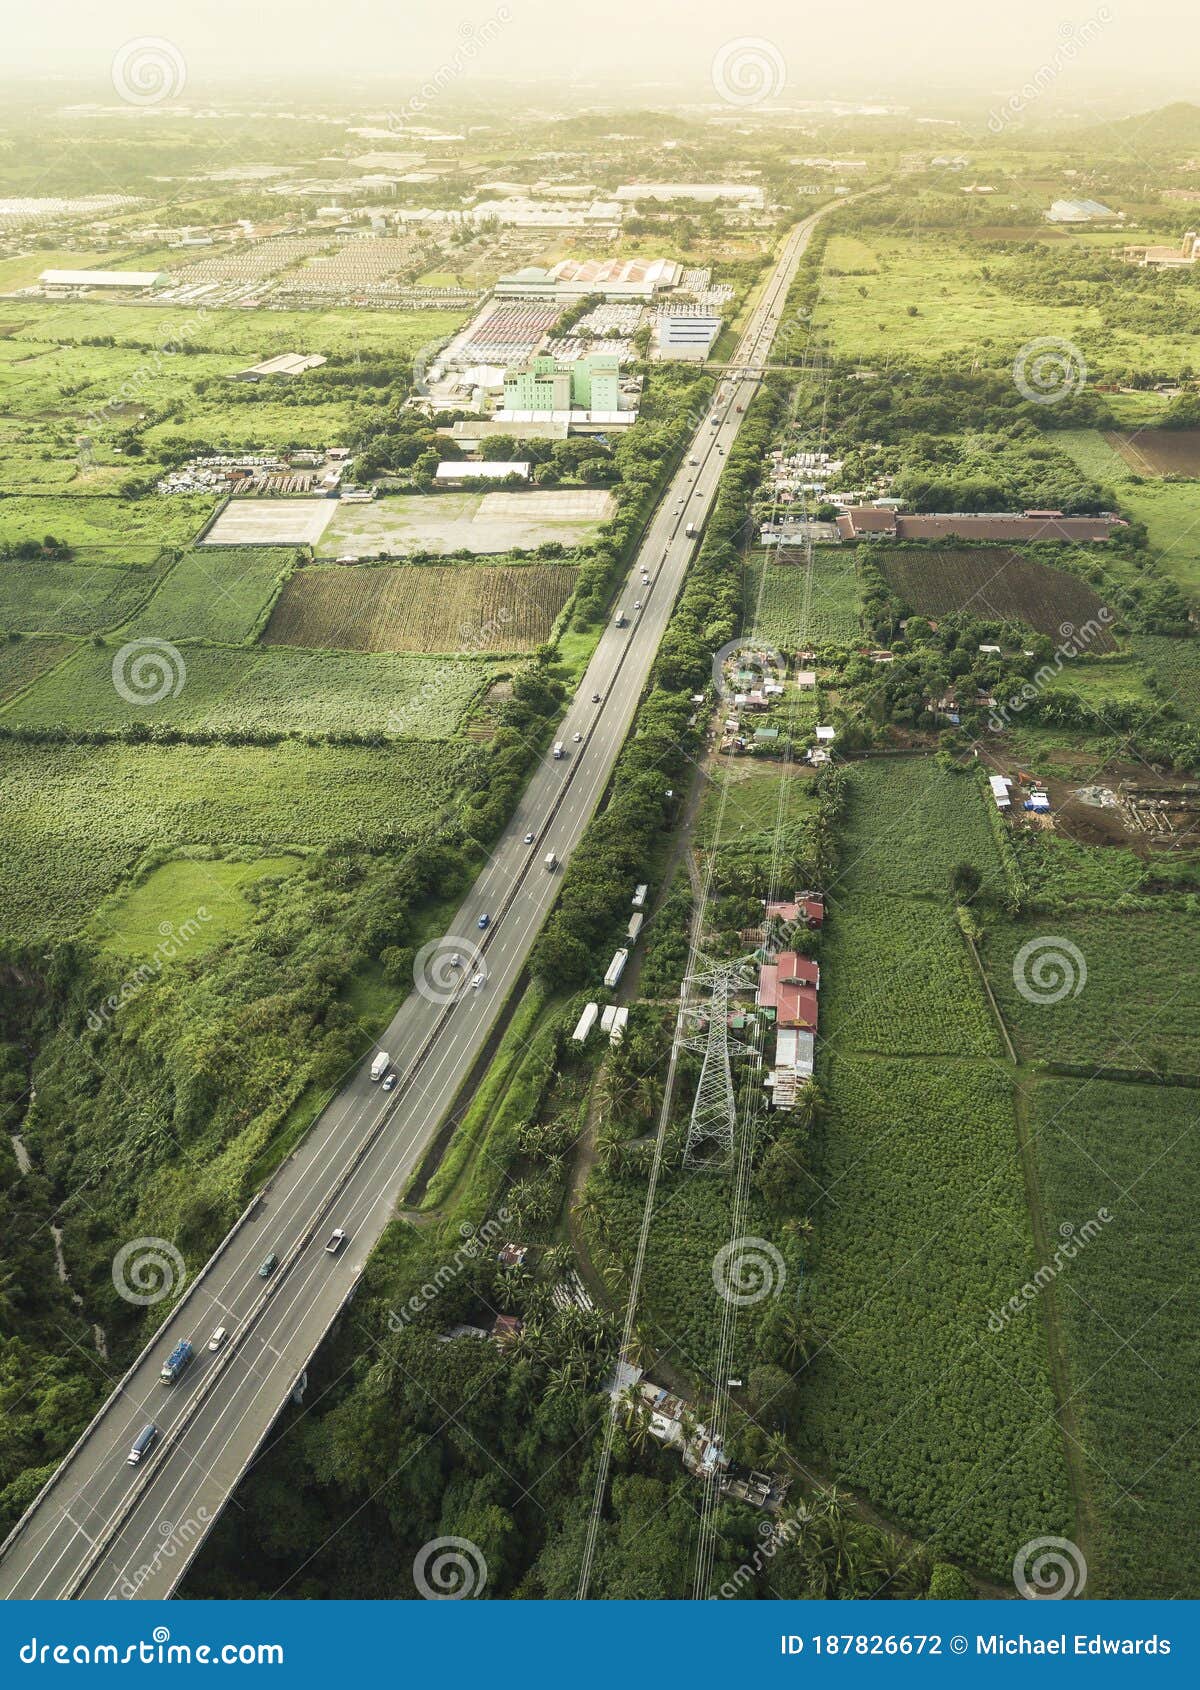 a major philippine highway. aerial of slex in sto tomas, batangas